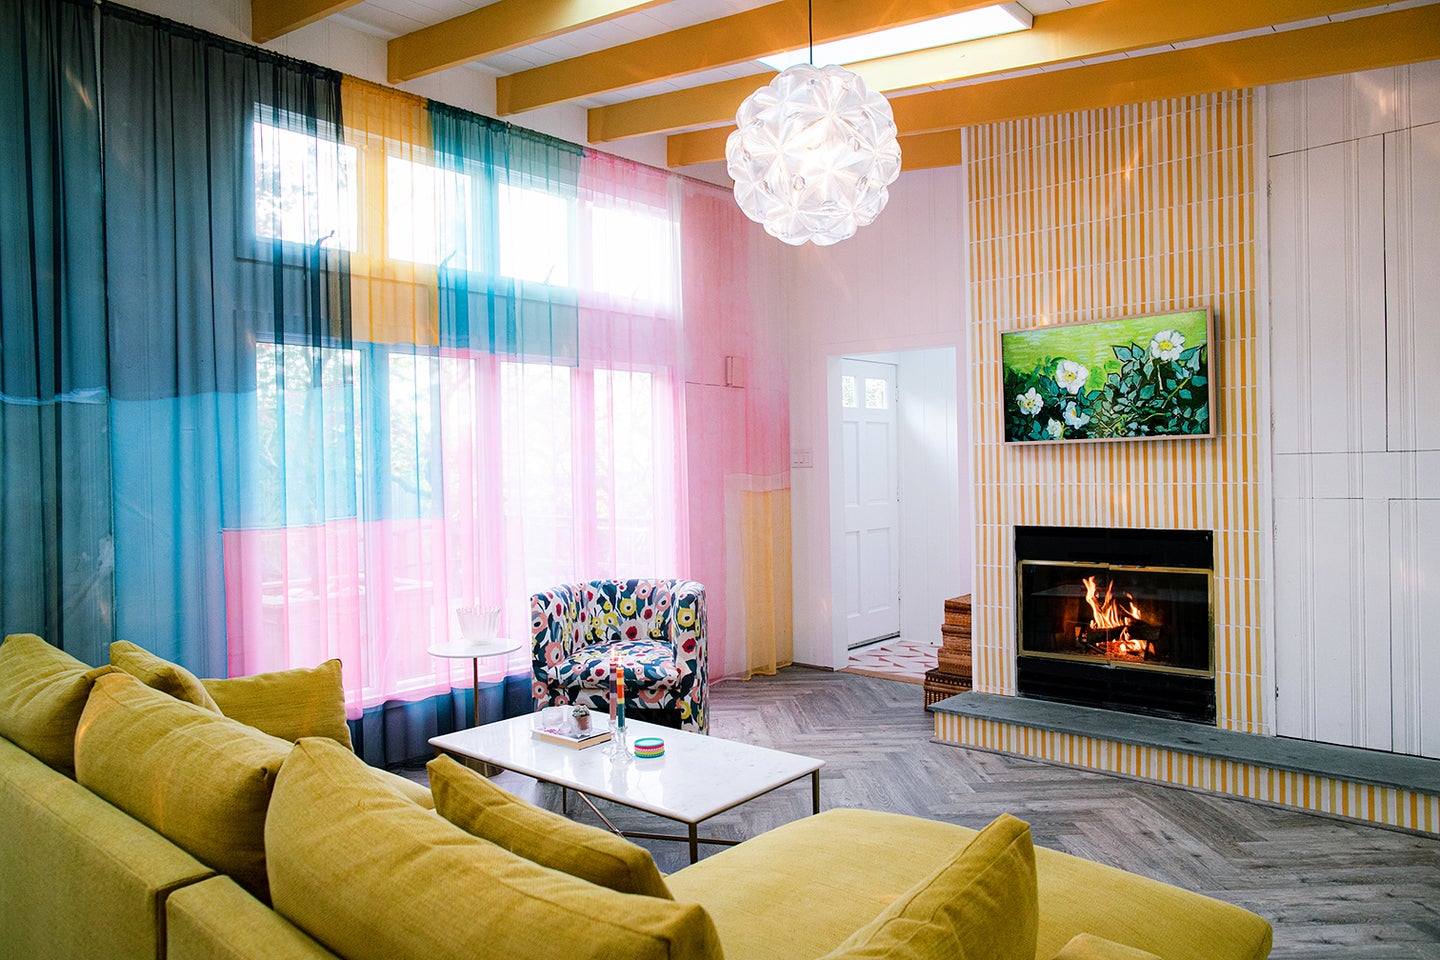 Living room with rainbow curtains and a yellow sofa